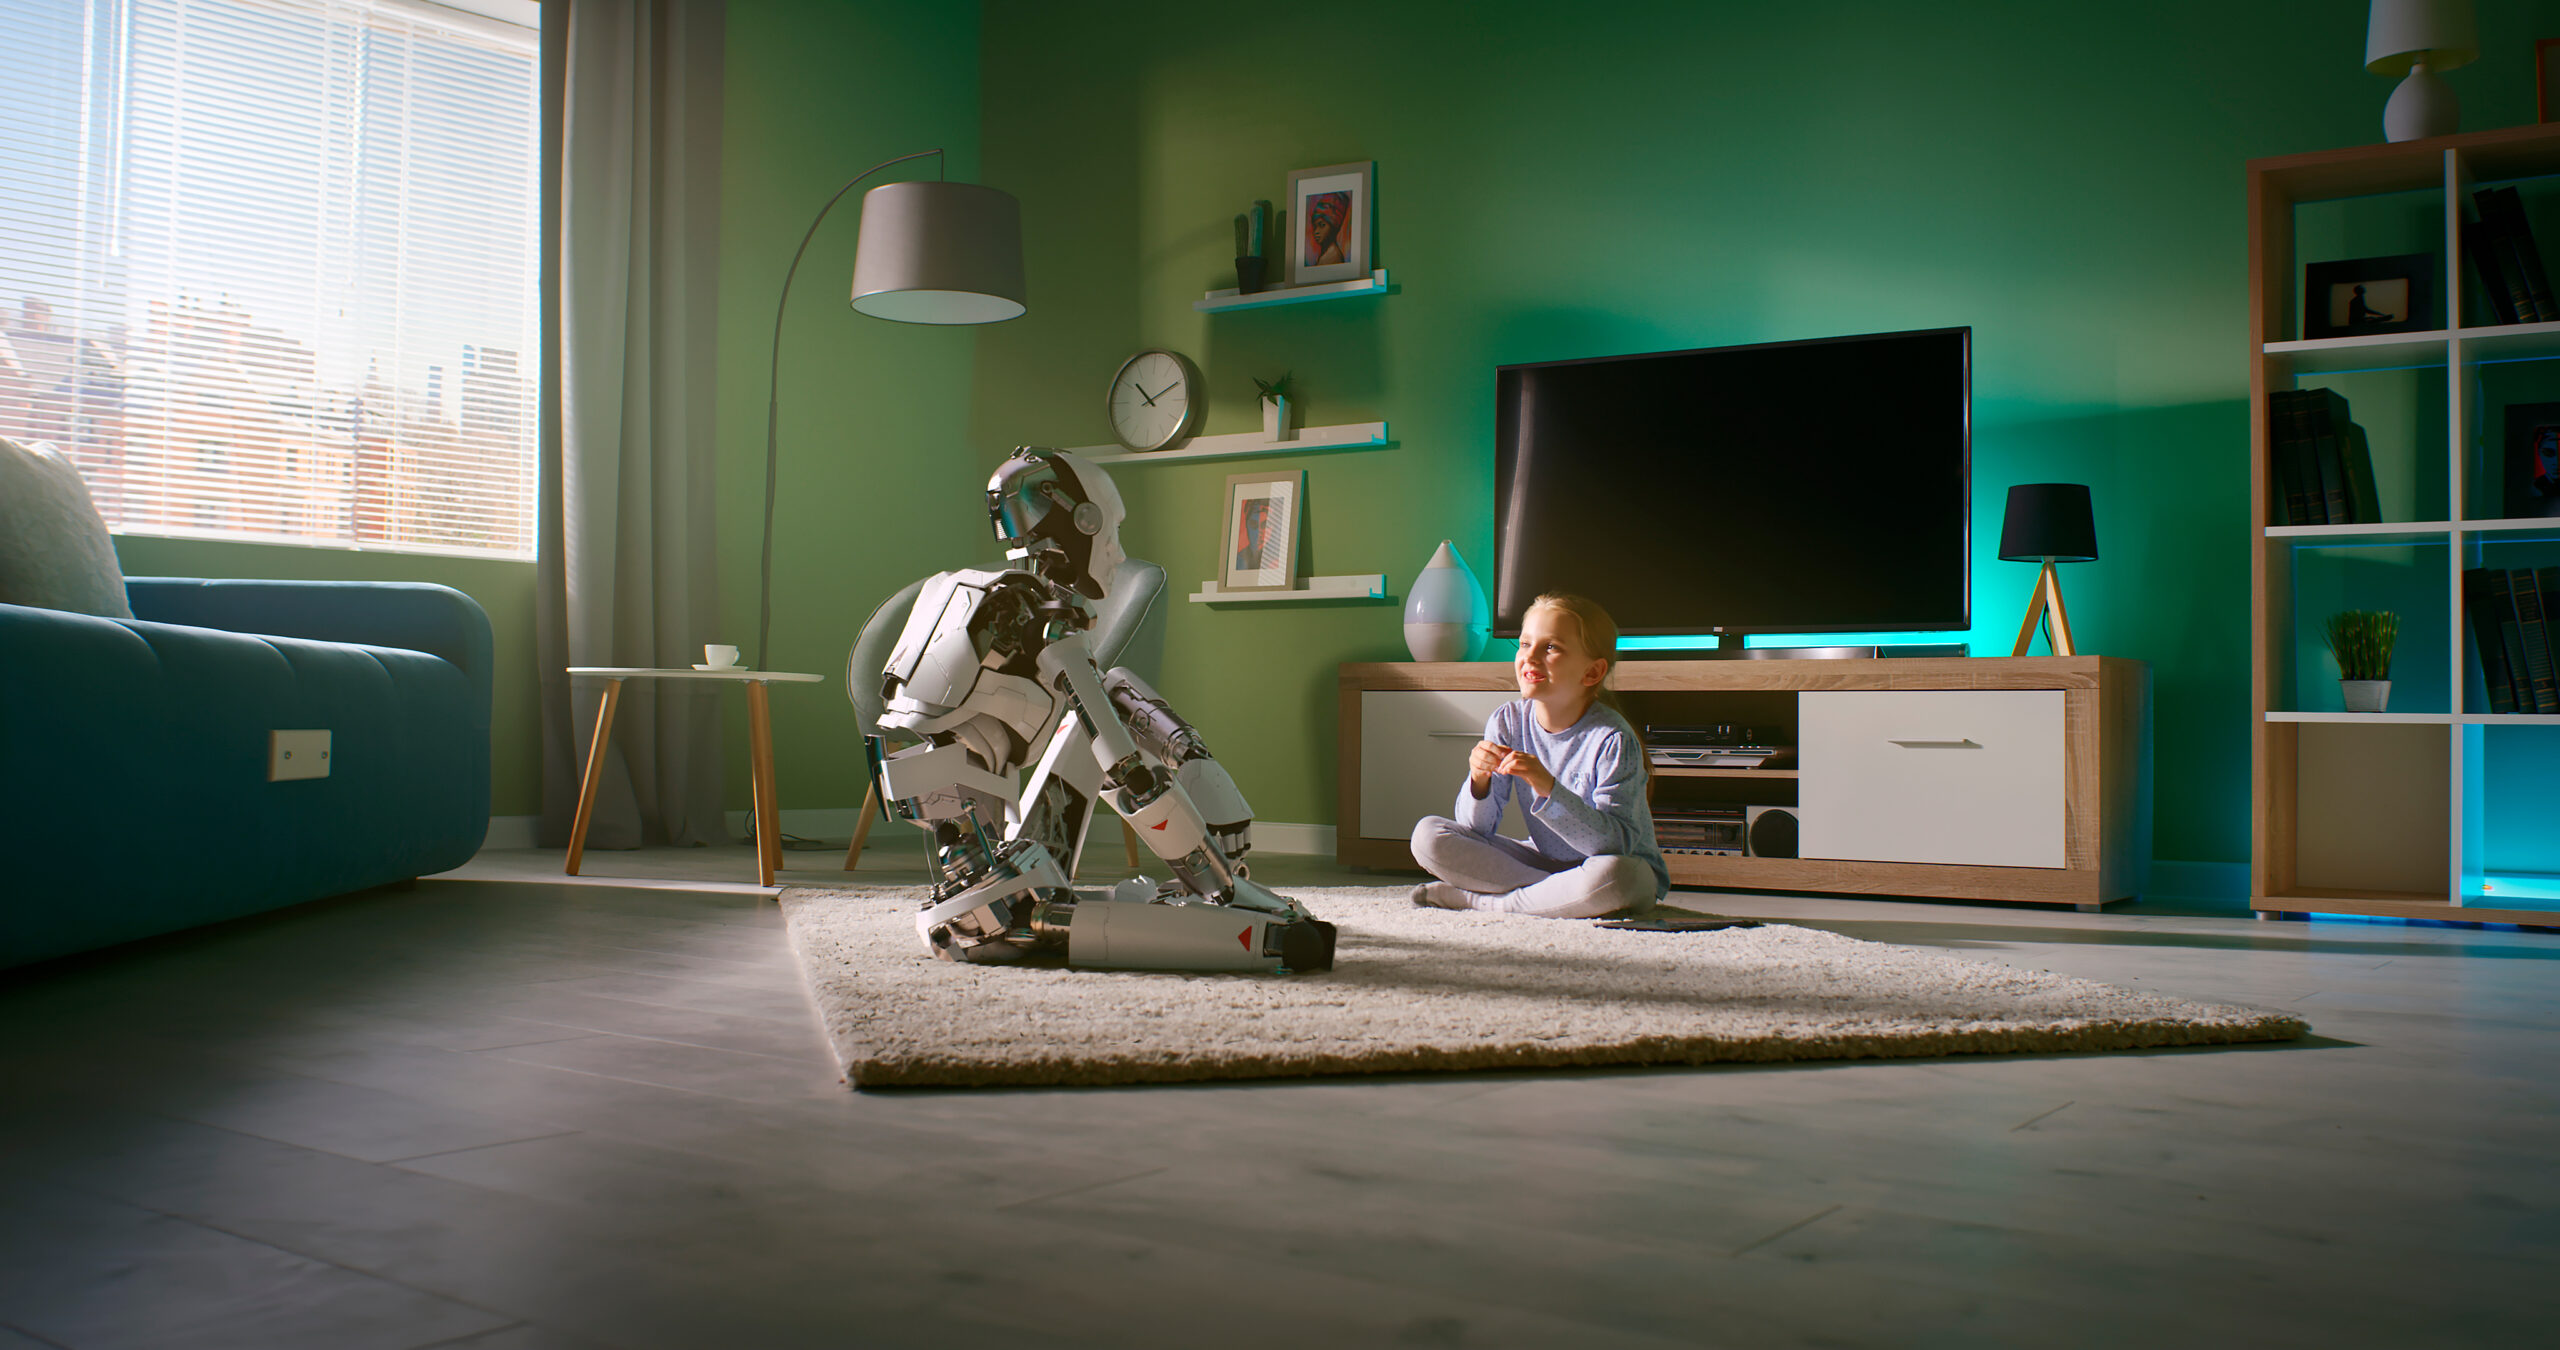 Girl speaking with robotic friend at home